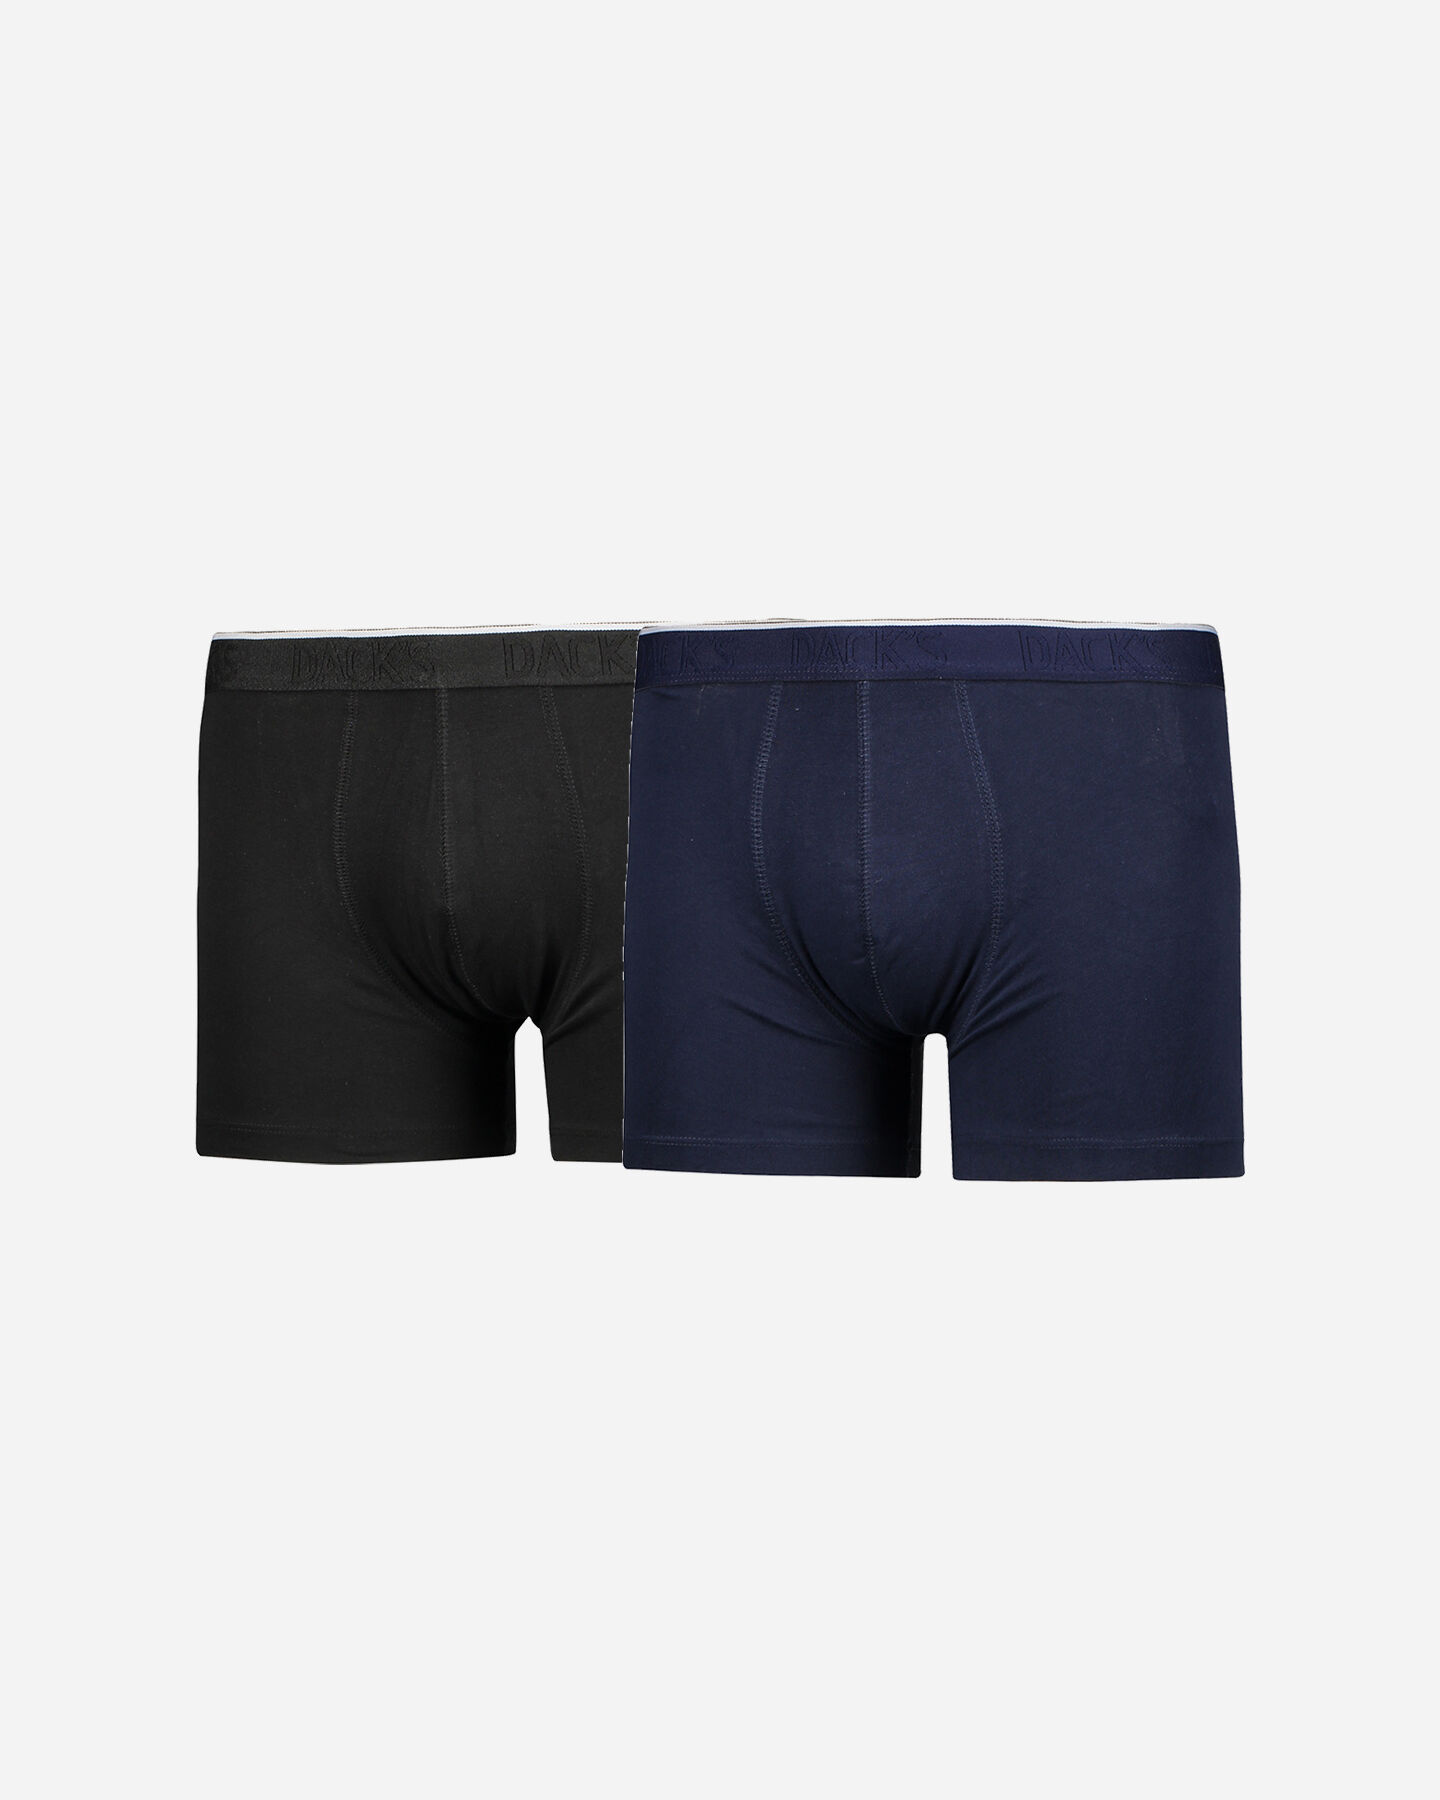  Intimo DACK'S BIPACK BASIC BOXER M S4061963 scatto 0